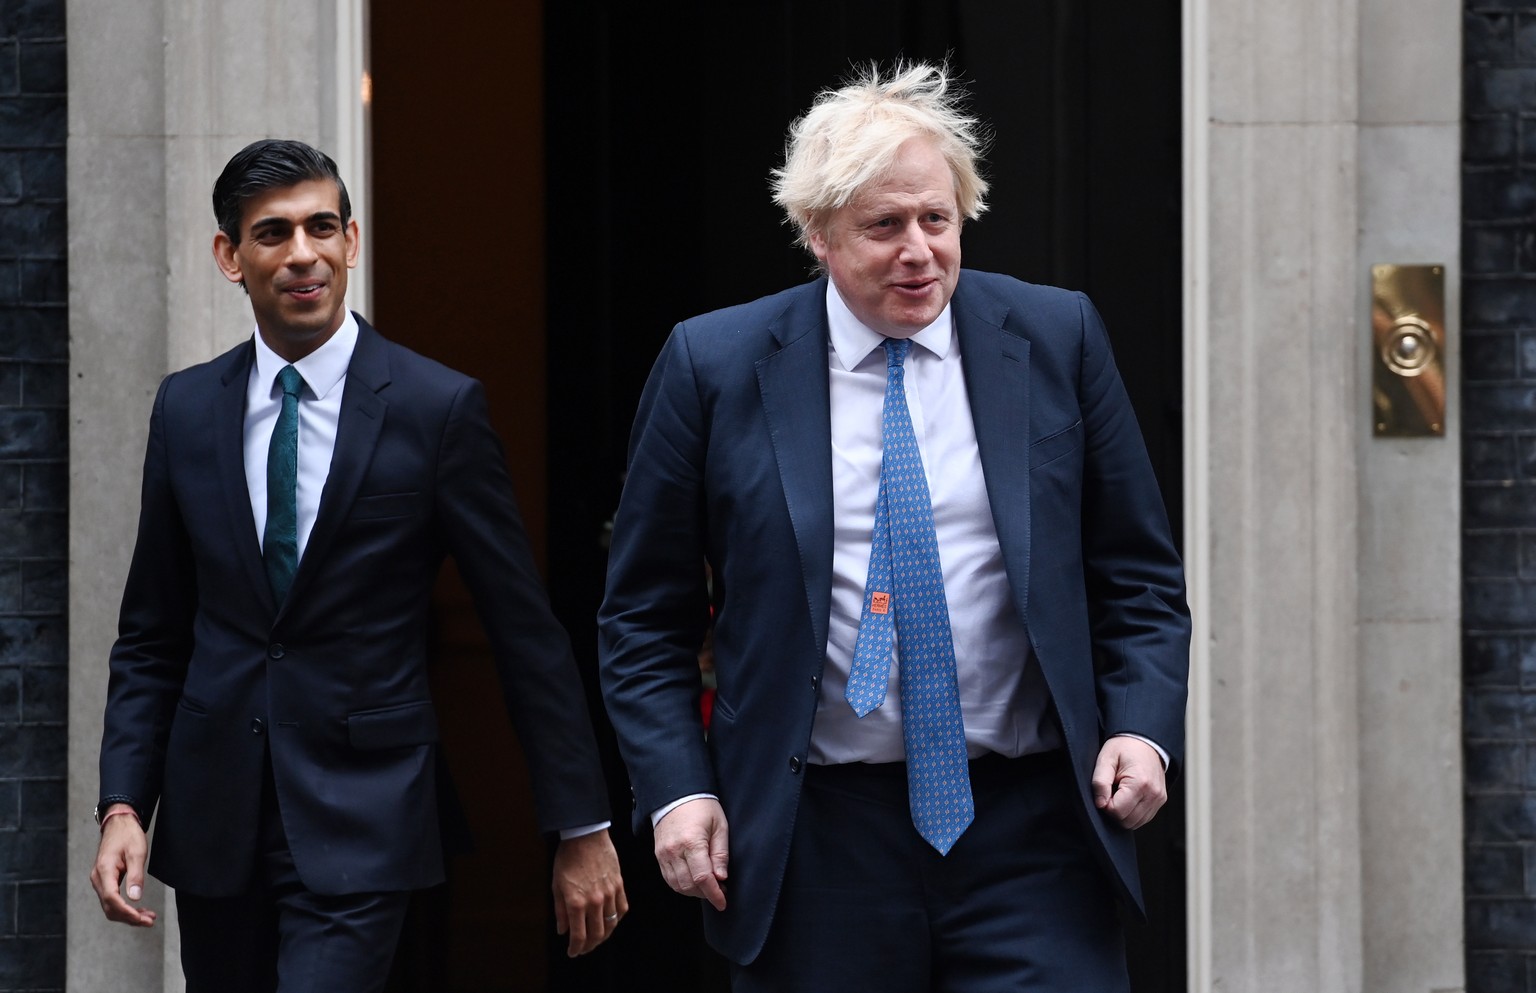 epa09614235 British Prime Minister Boris Johnson (R) with British Chancellor of the Exchequer Rishi Sunak (L), at 10 Downing Street in London, Britain, 01 December 2021. NHS leaders have warned that N ...